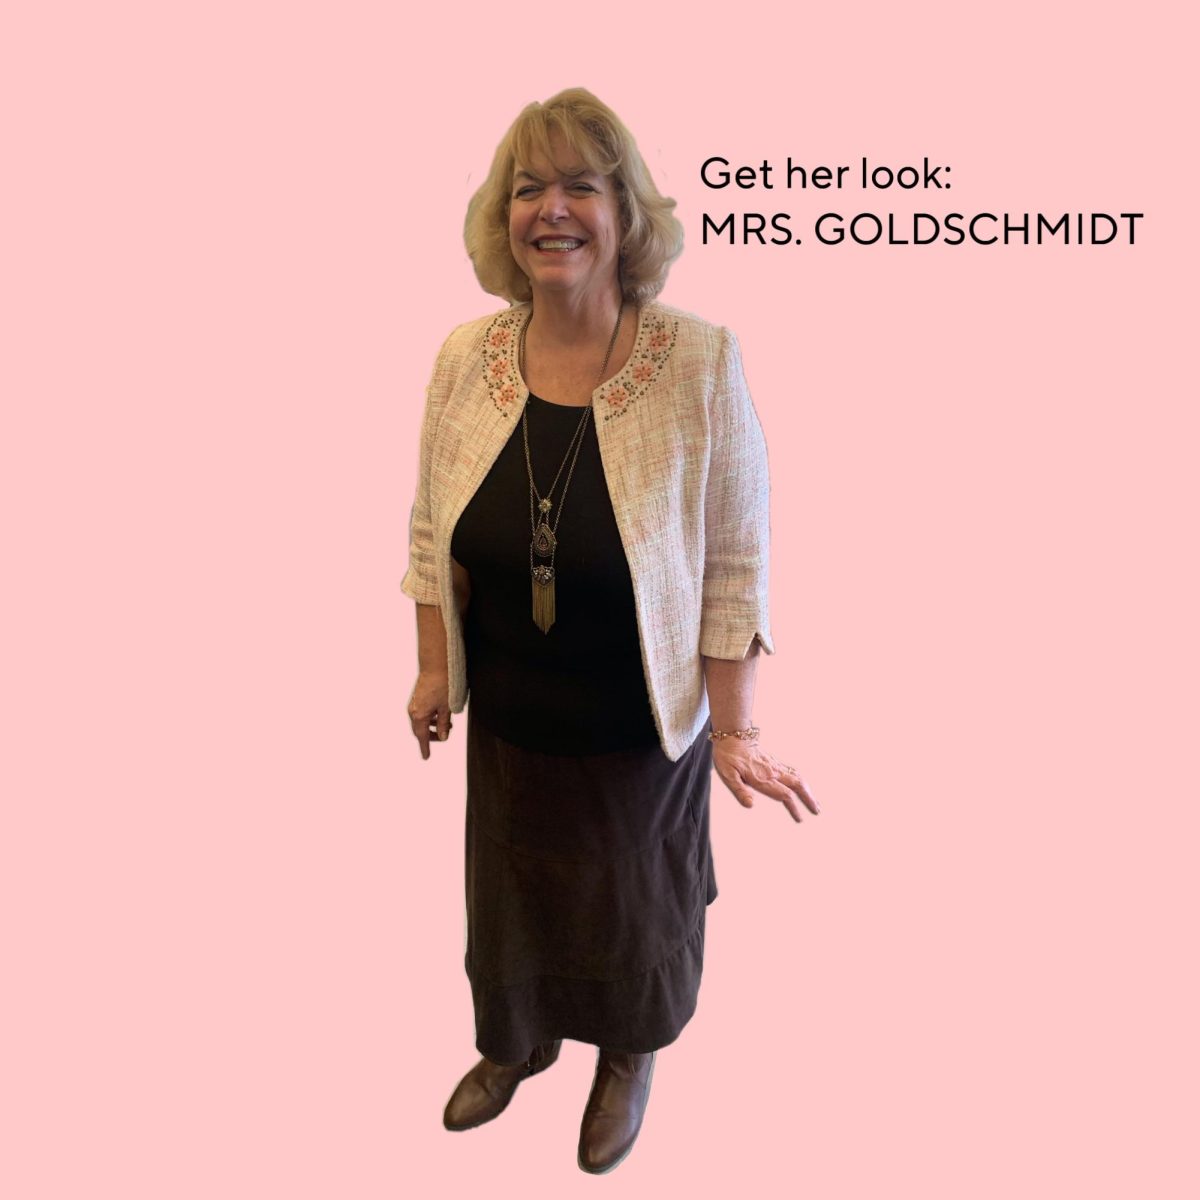 Mrs.+Goldschmidts+fabulous+original+outfit.+Shes+wearing+a+light+pink+tweed+gingham+jacket+%28very+Scream+Queens+of+her%29%2C+that+has+pink+and+brown+floral+embellishments+on+the+collar.+She+matches+the+pink+flowers+on+her+jacket+with+a+similar+pink+bracelet+and+flower+necklace.+Dont+you+love+her+attention+to+detail%3F+Mrs.+Goldschmidt+chose+a+simple+black+top+to+wear+as+a+base+layer%2C+along+with+a+brown+tiered+maxi+skirt.+Notice+how+she+matched+the+brown+on+her+skirt+with+the+brown+embellishments+on+her+jacket.+She+pairs+this+outfit+with+a+pair+of+brown+western+boots-very+trendy%21